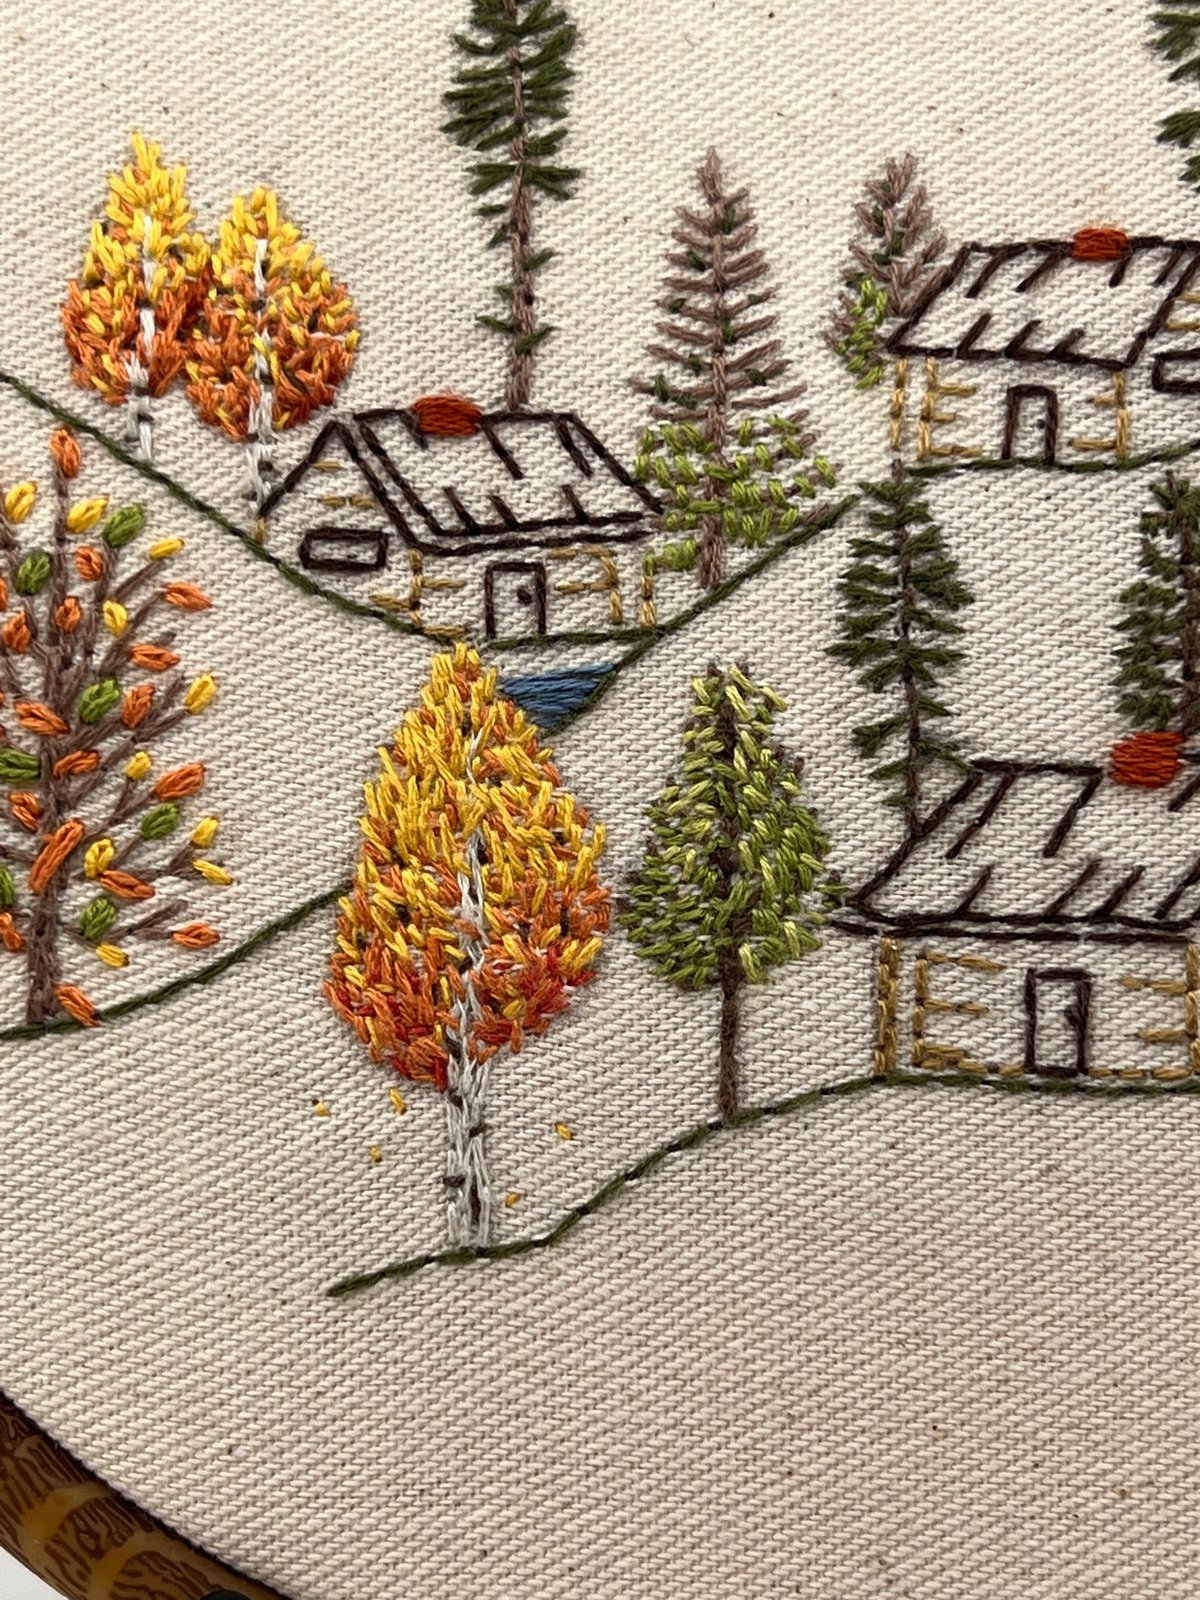 8" Autumn Cabin in the Woods Forest Embroidery Kit